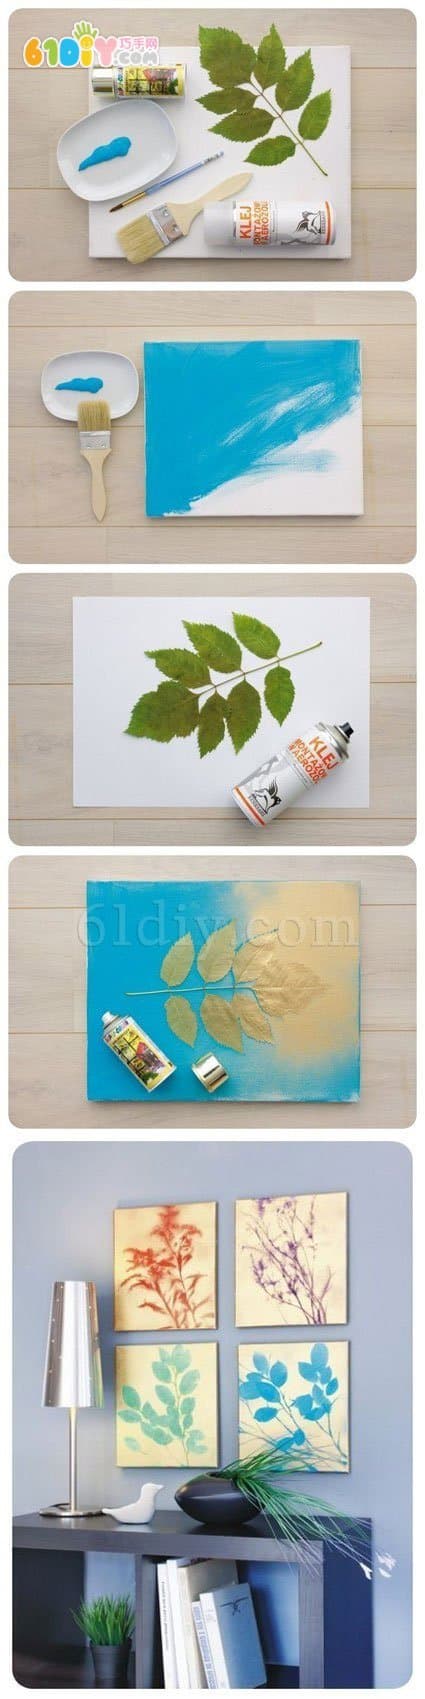 Making art deco paintings with flowers and leaves